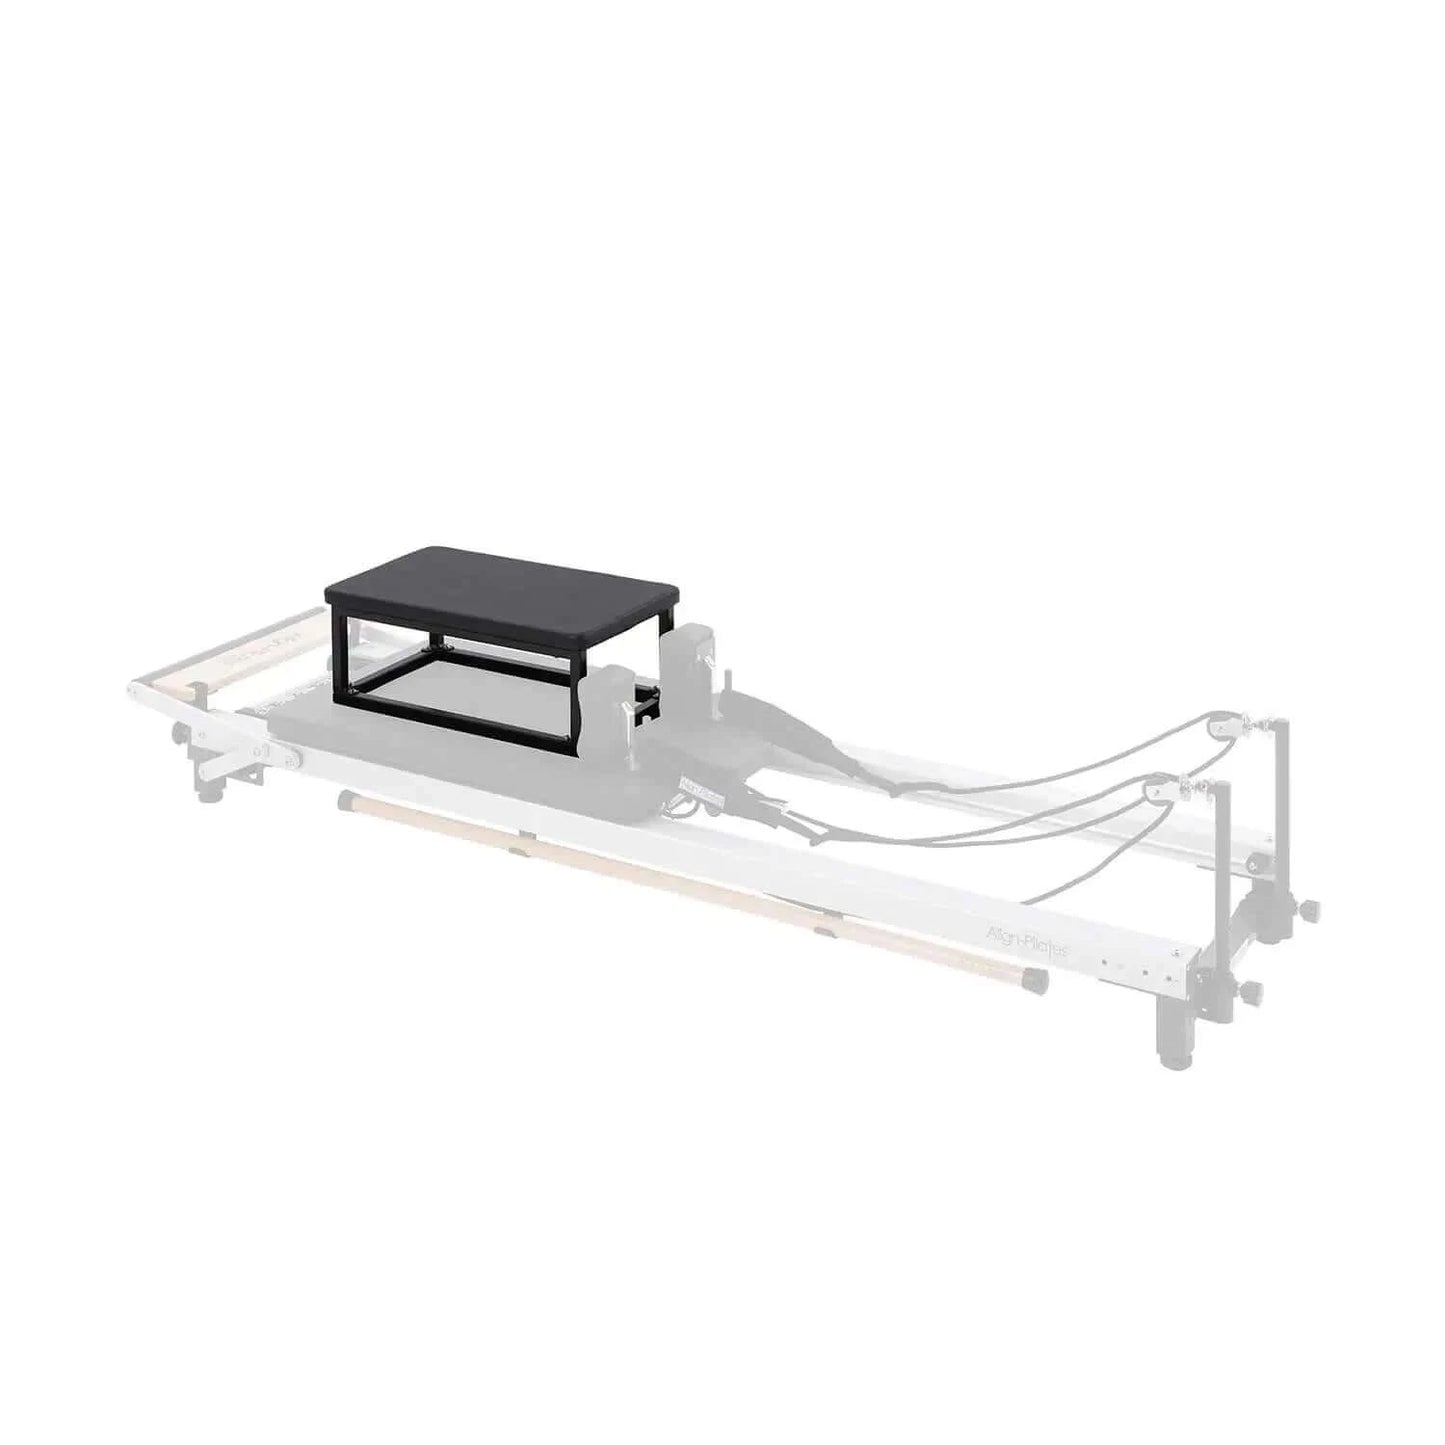  Align Pilates Frame Sitting Box by Align Pilates sold by Pilates Matters® by BSP LLC